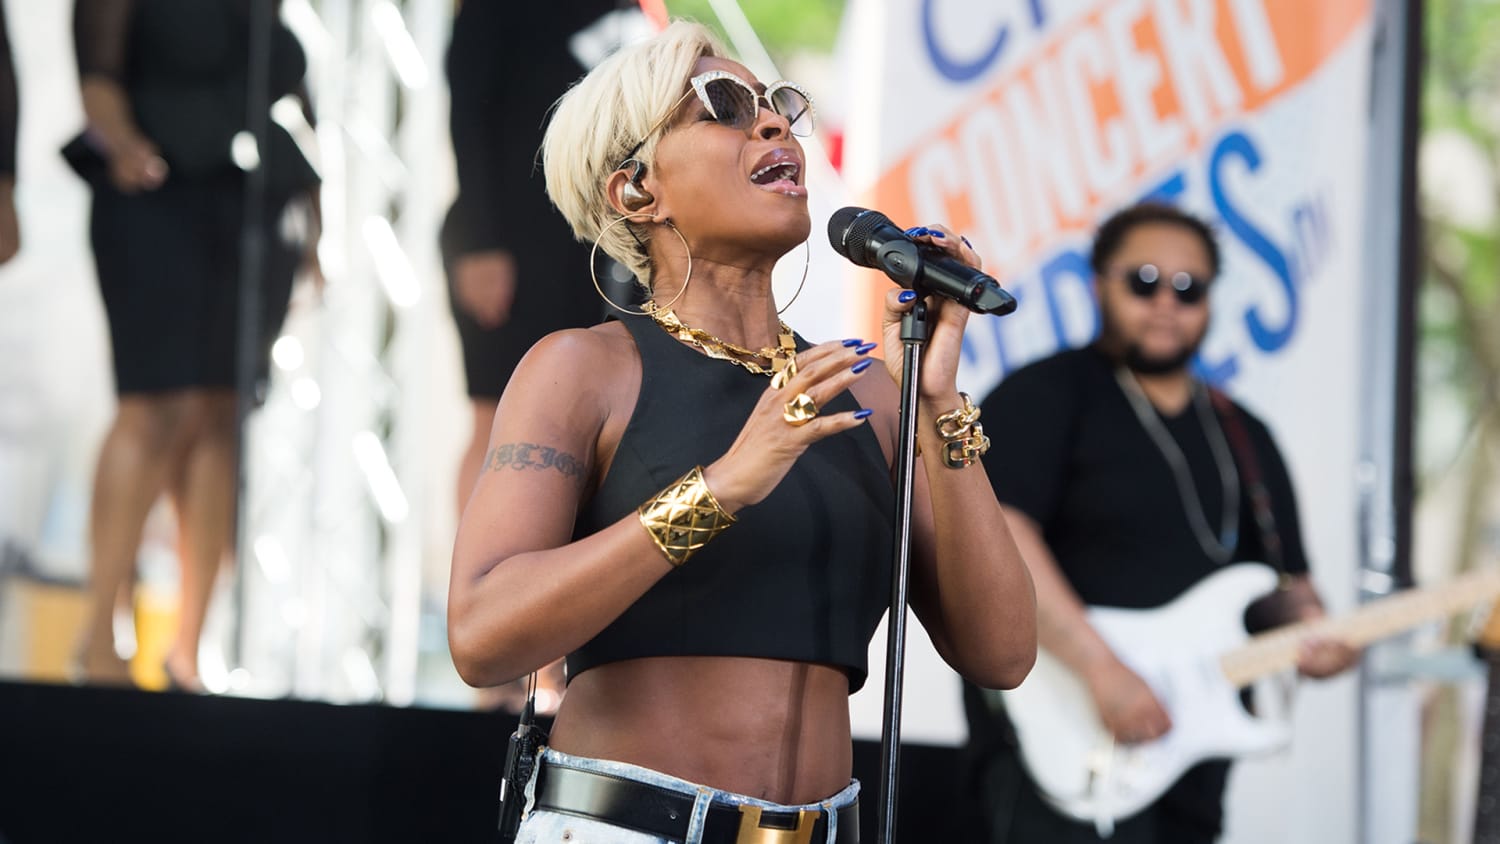 Iconic R&B singer Mary J. Blige turns up the heat on the TODAY plaza.